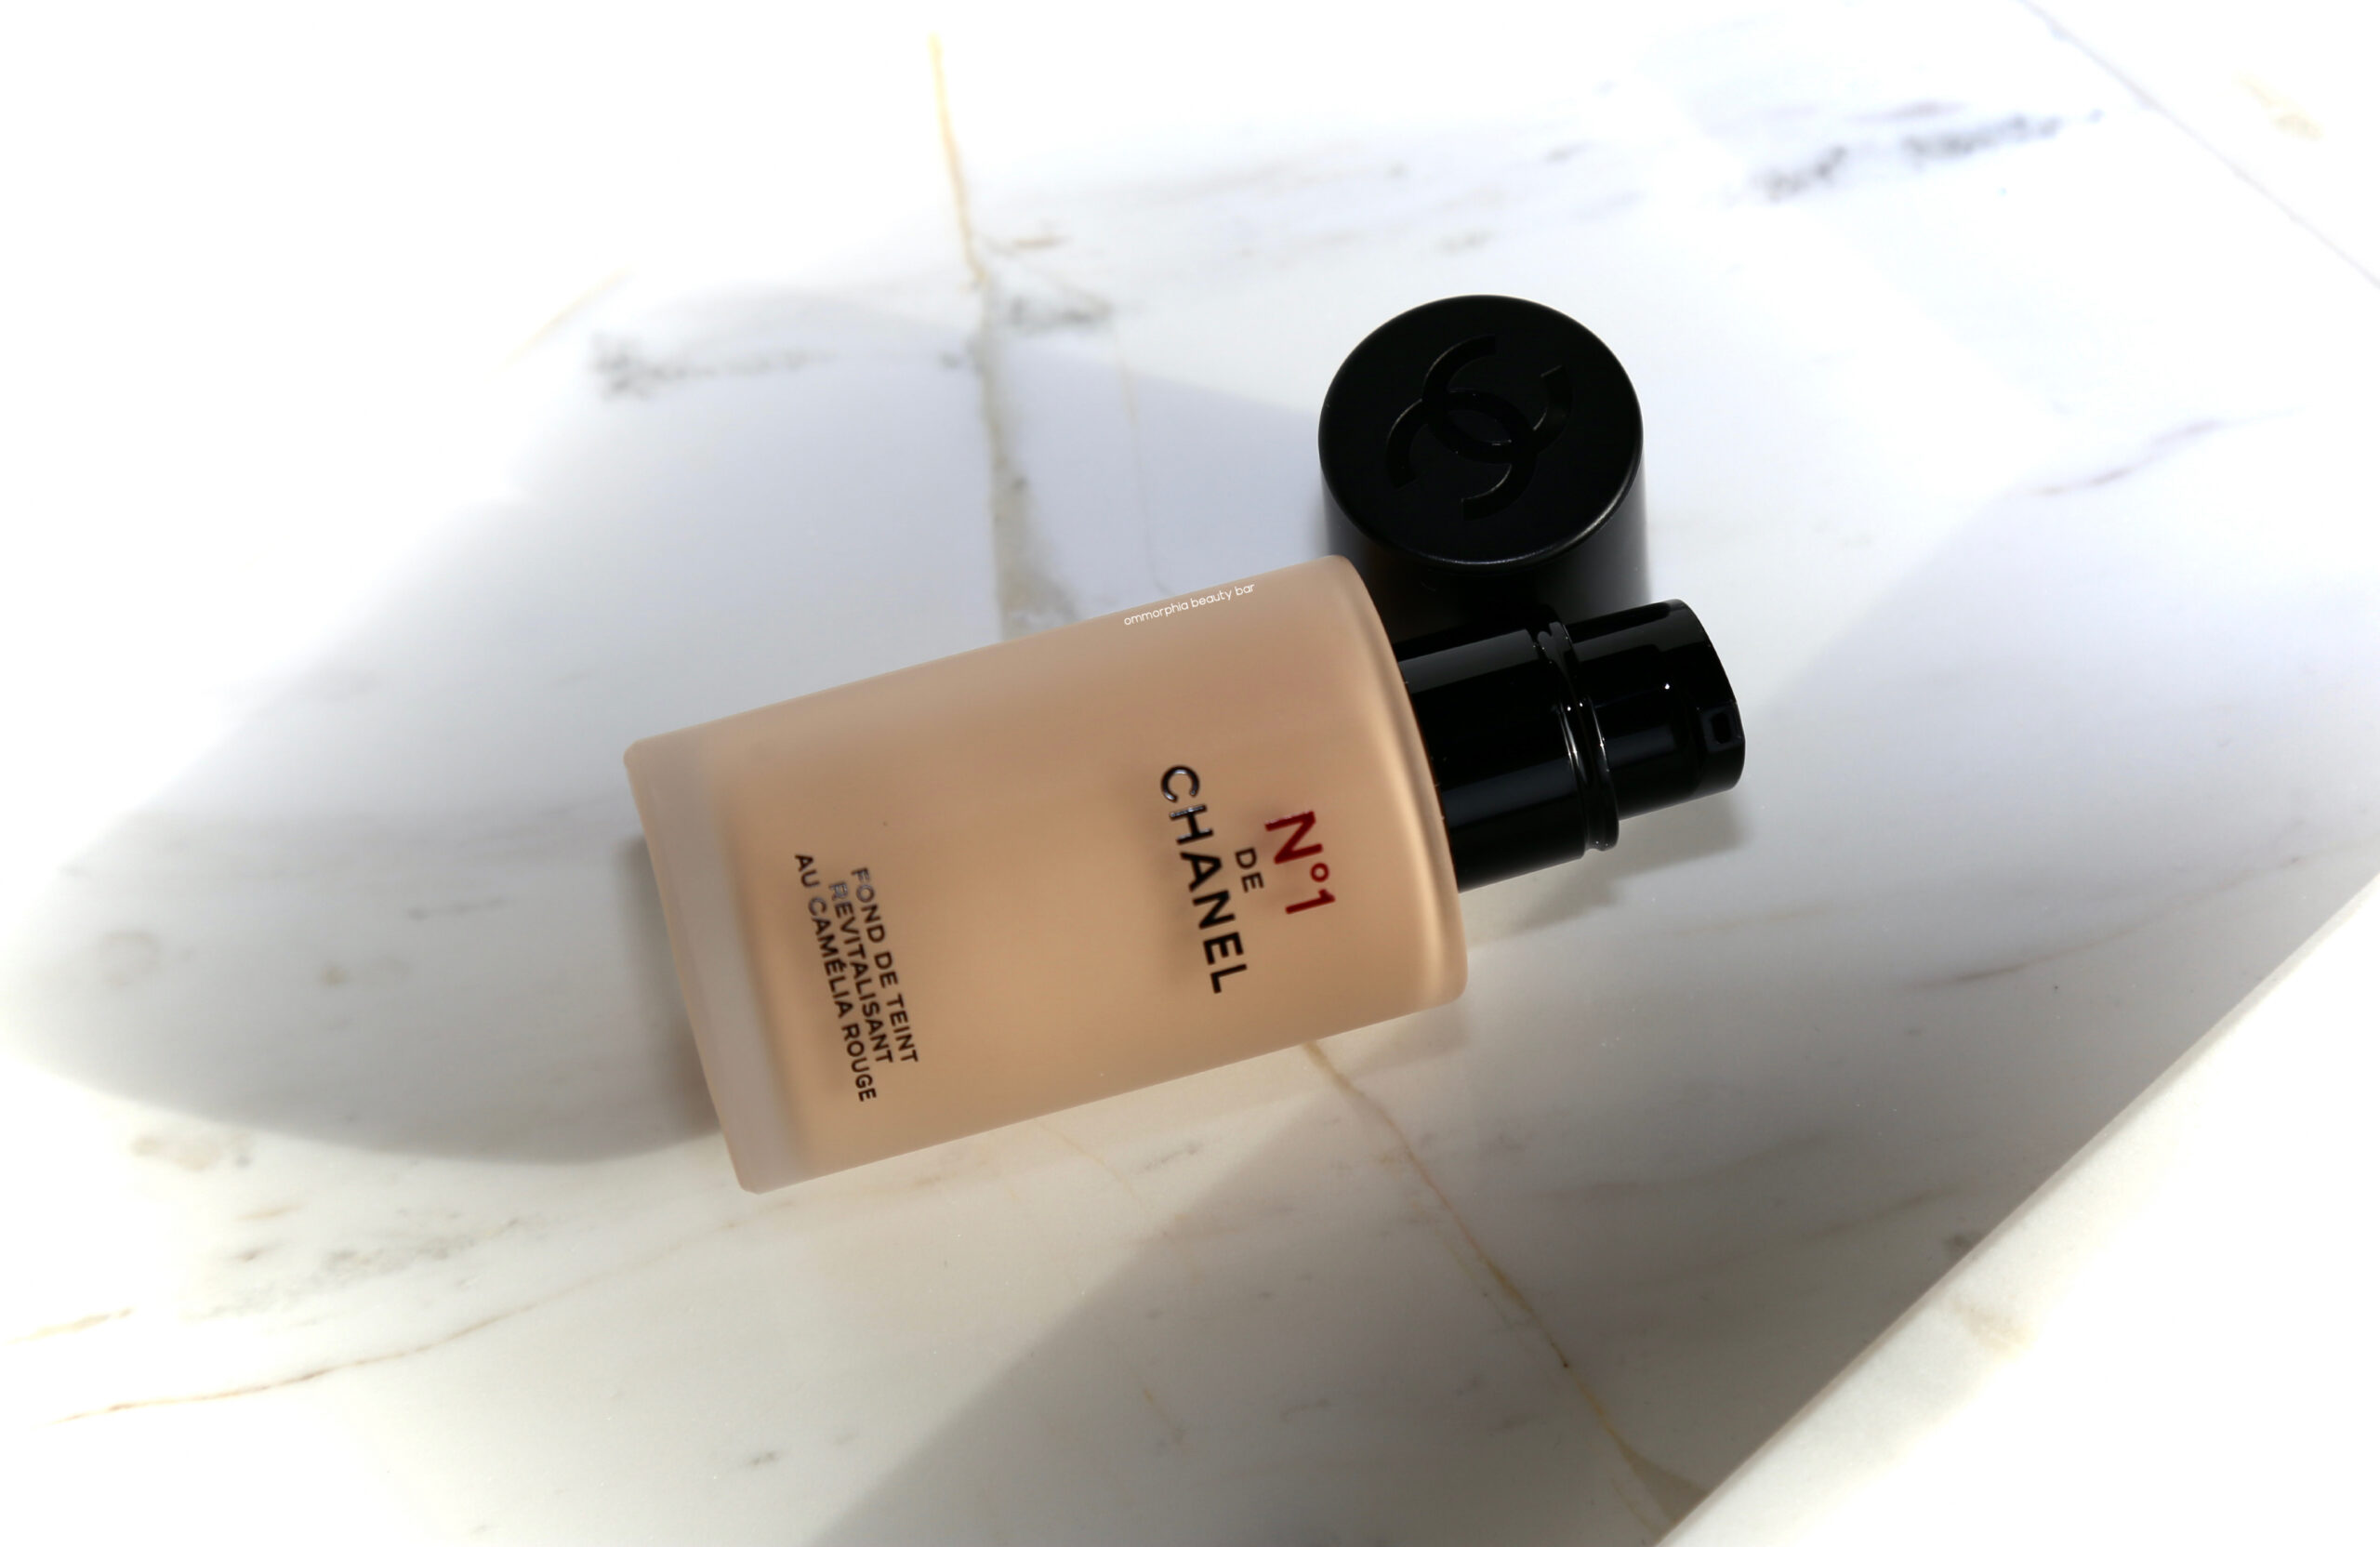 No 1 de Chanel Revitalising Foundation, Review and Wear Test